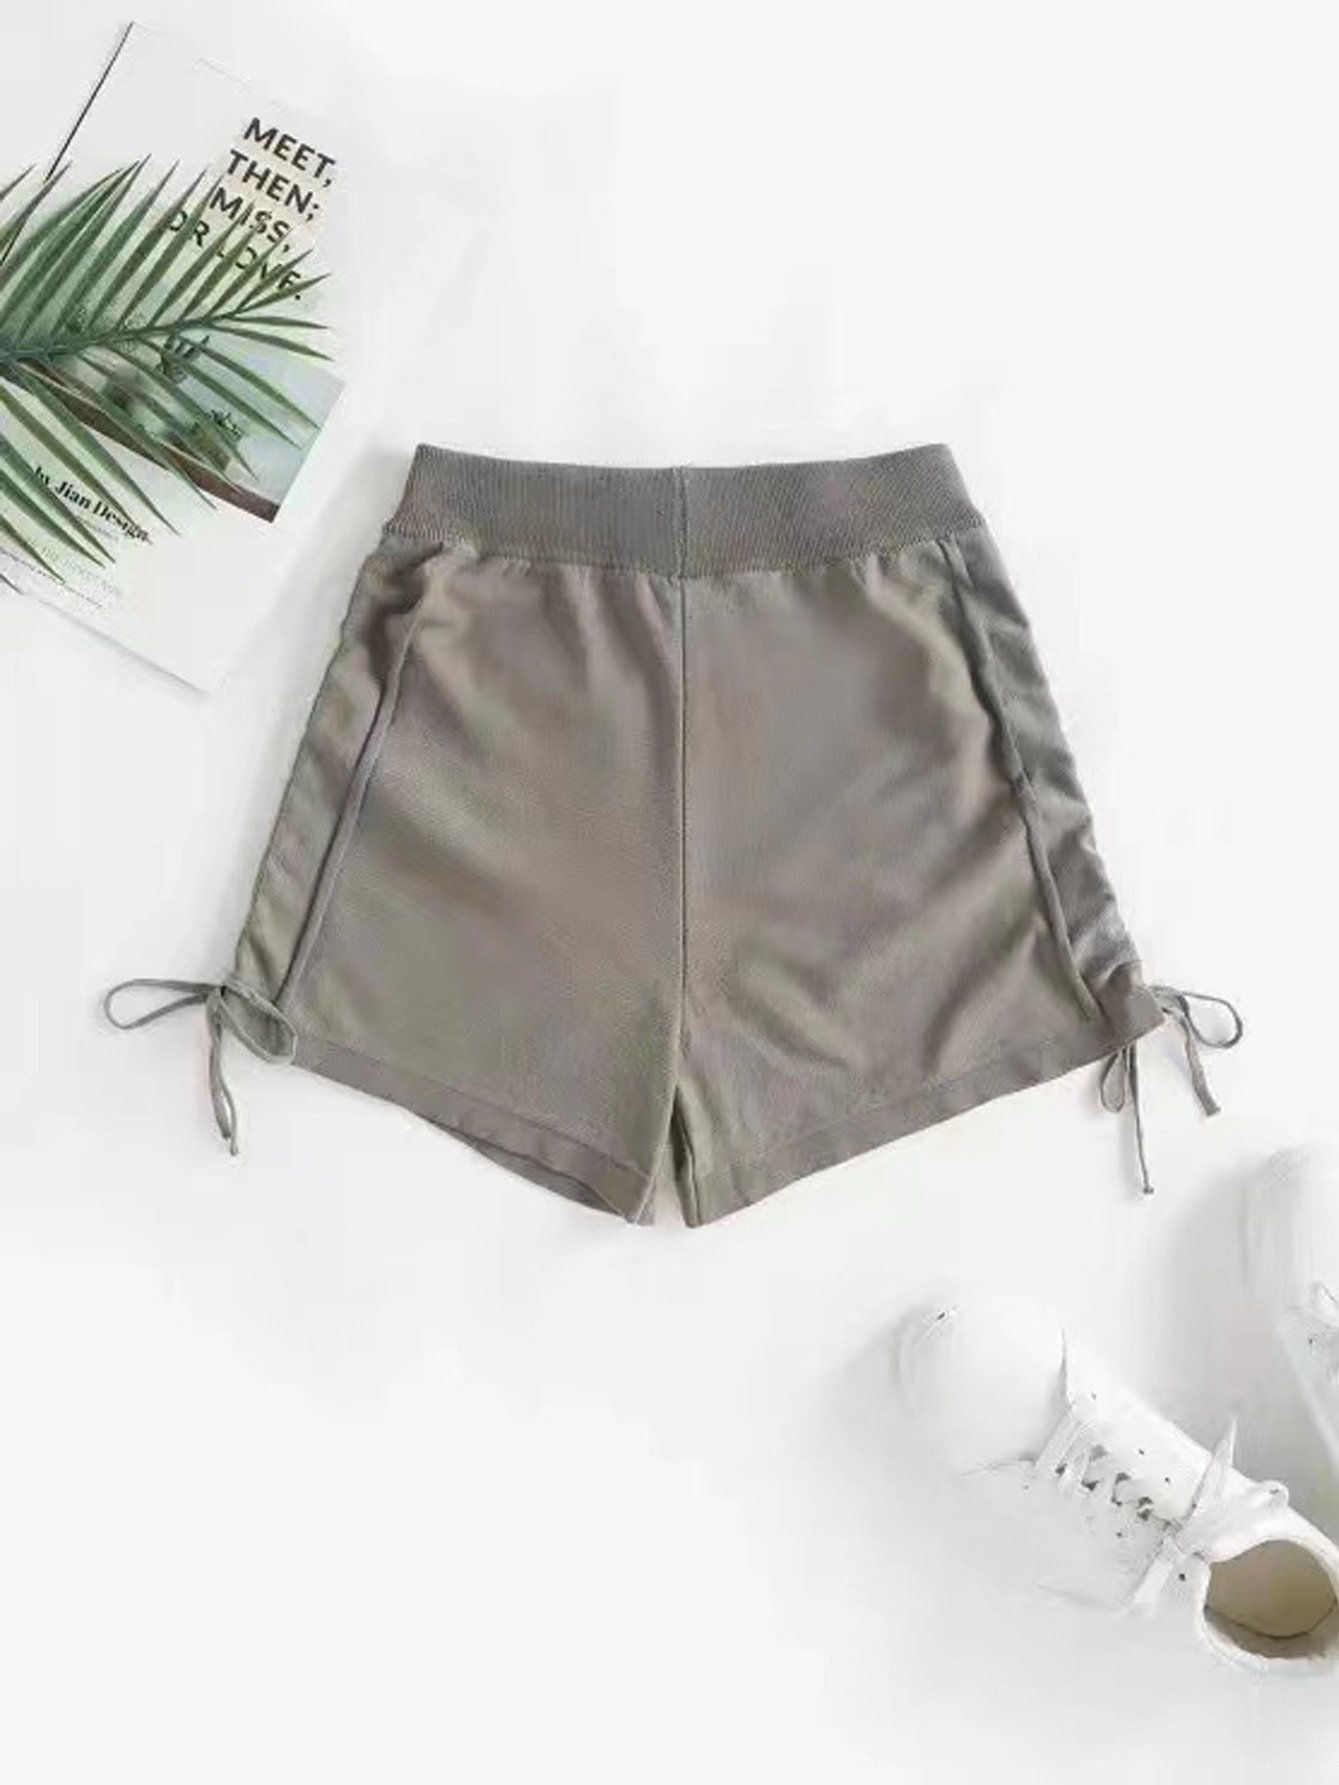 High Waisted Solid Summer Khaki Shorts Women For Women Elegant Zipper  Outfits, Sexy Pantalones, Cortos Miniso Ropa De Mujer From Doulaso, $37.77